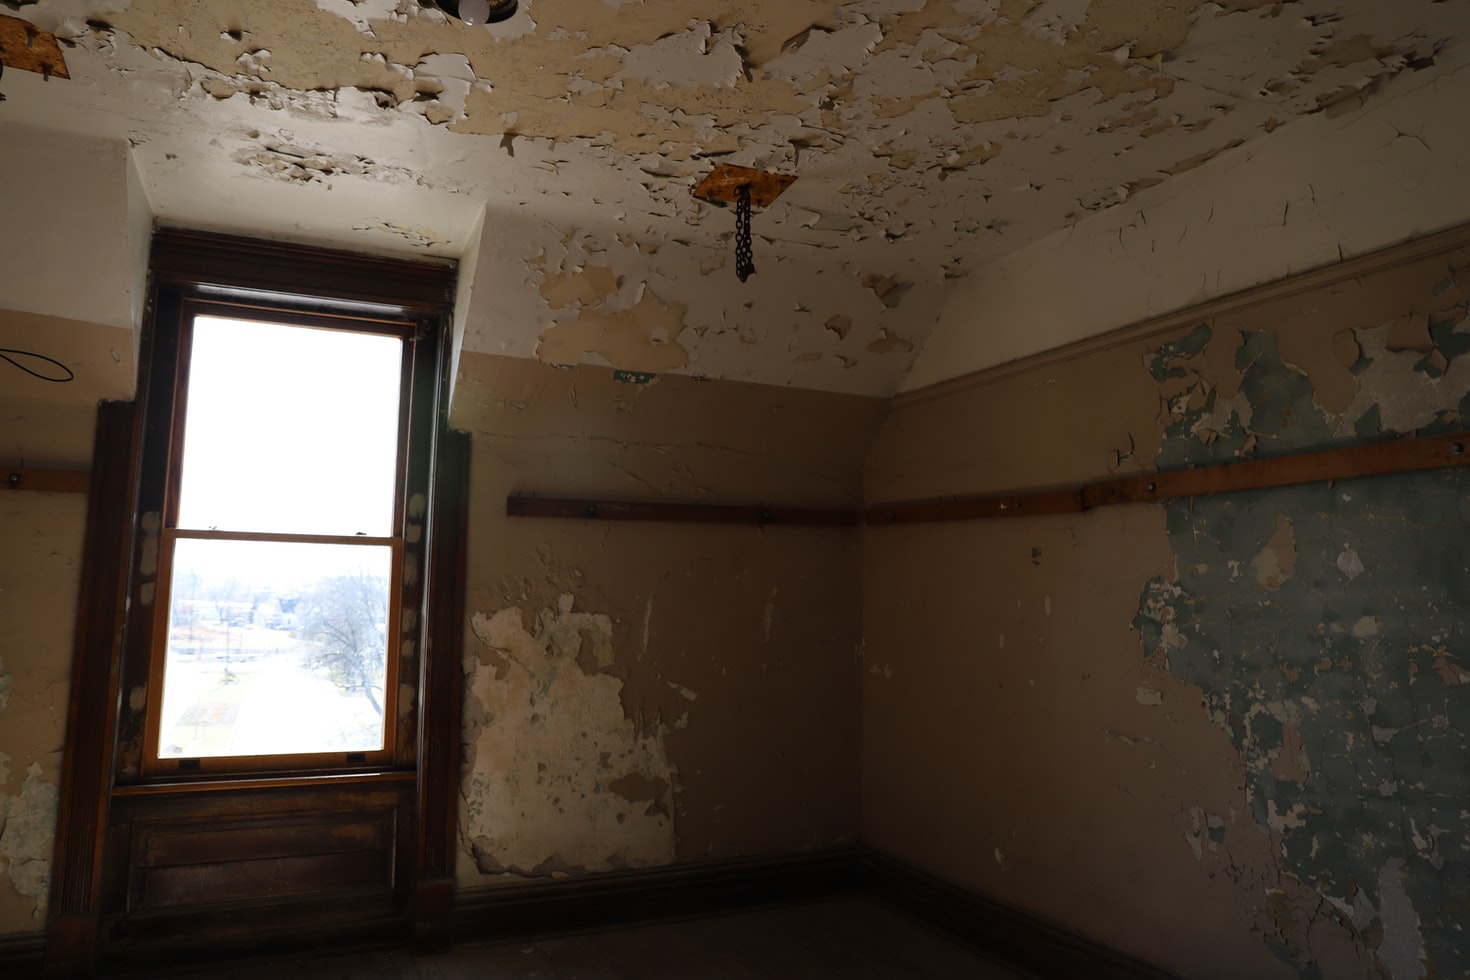 How Dangerous is Mold in Your Home & What Can You Do?